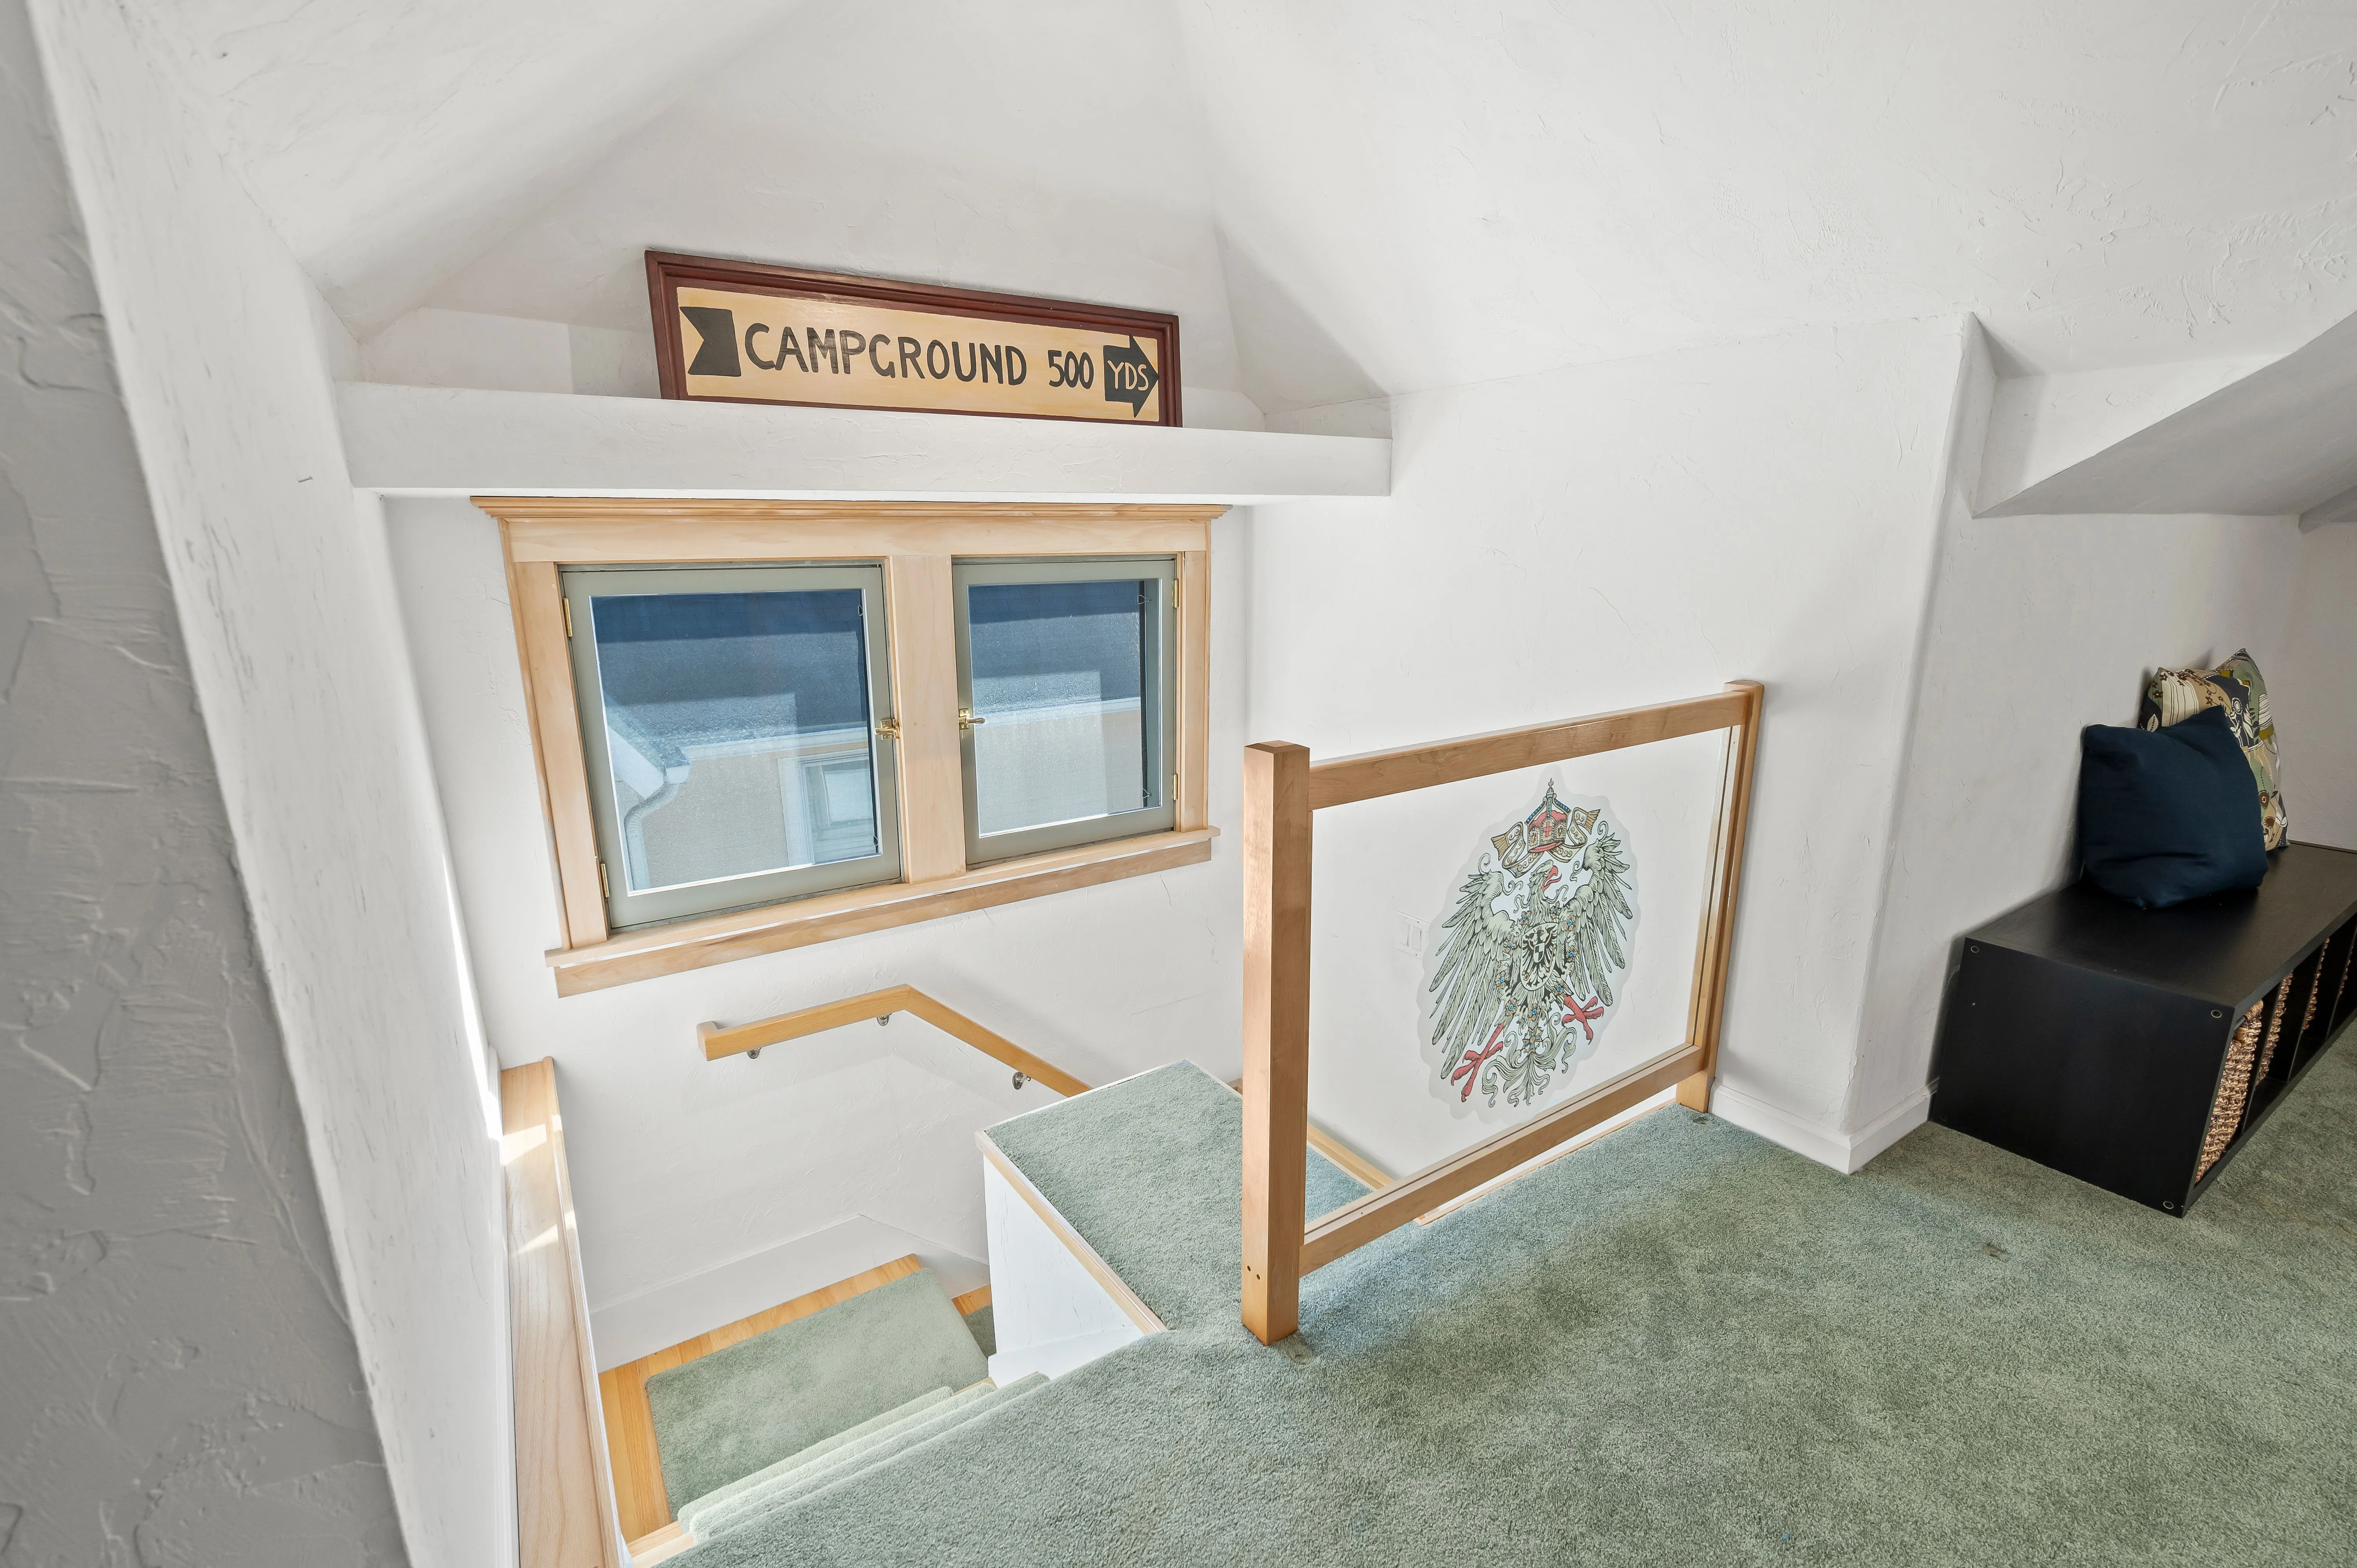 Interior view of a cozy attic room with a sign saying "CAMPING ⛺️", a protective railing, two windows, a framed map on the wall, and a black piece of luggage.